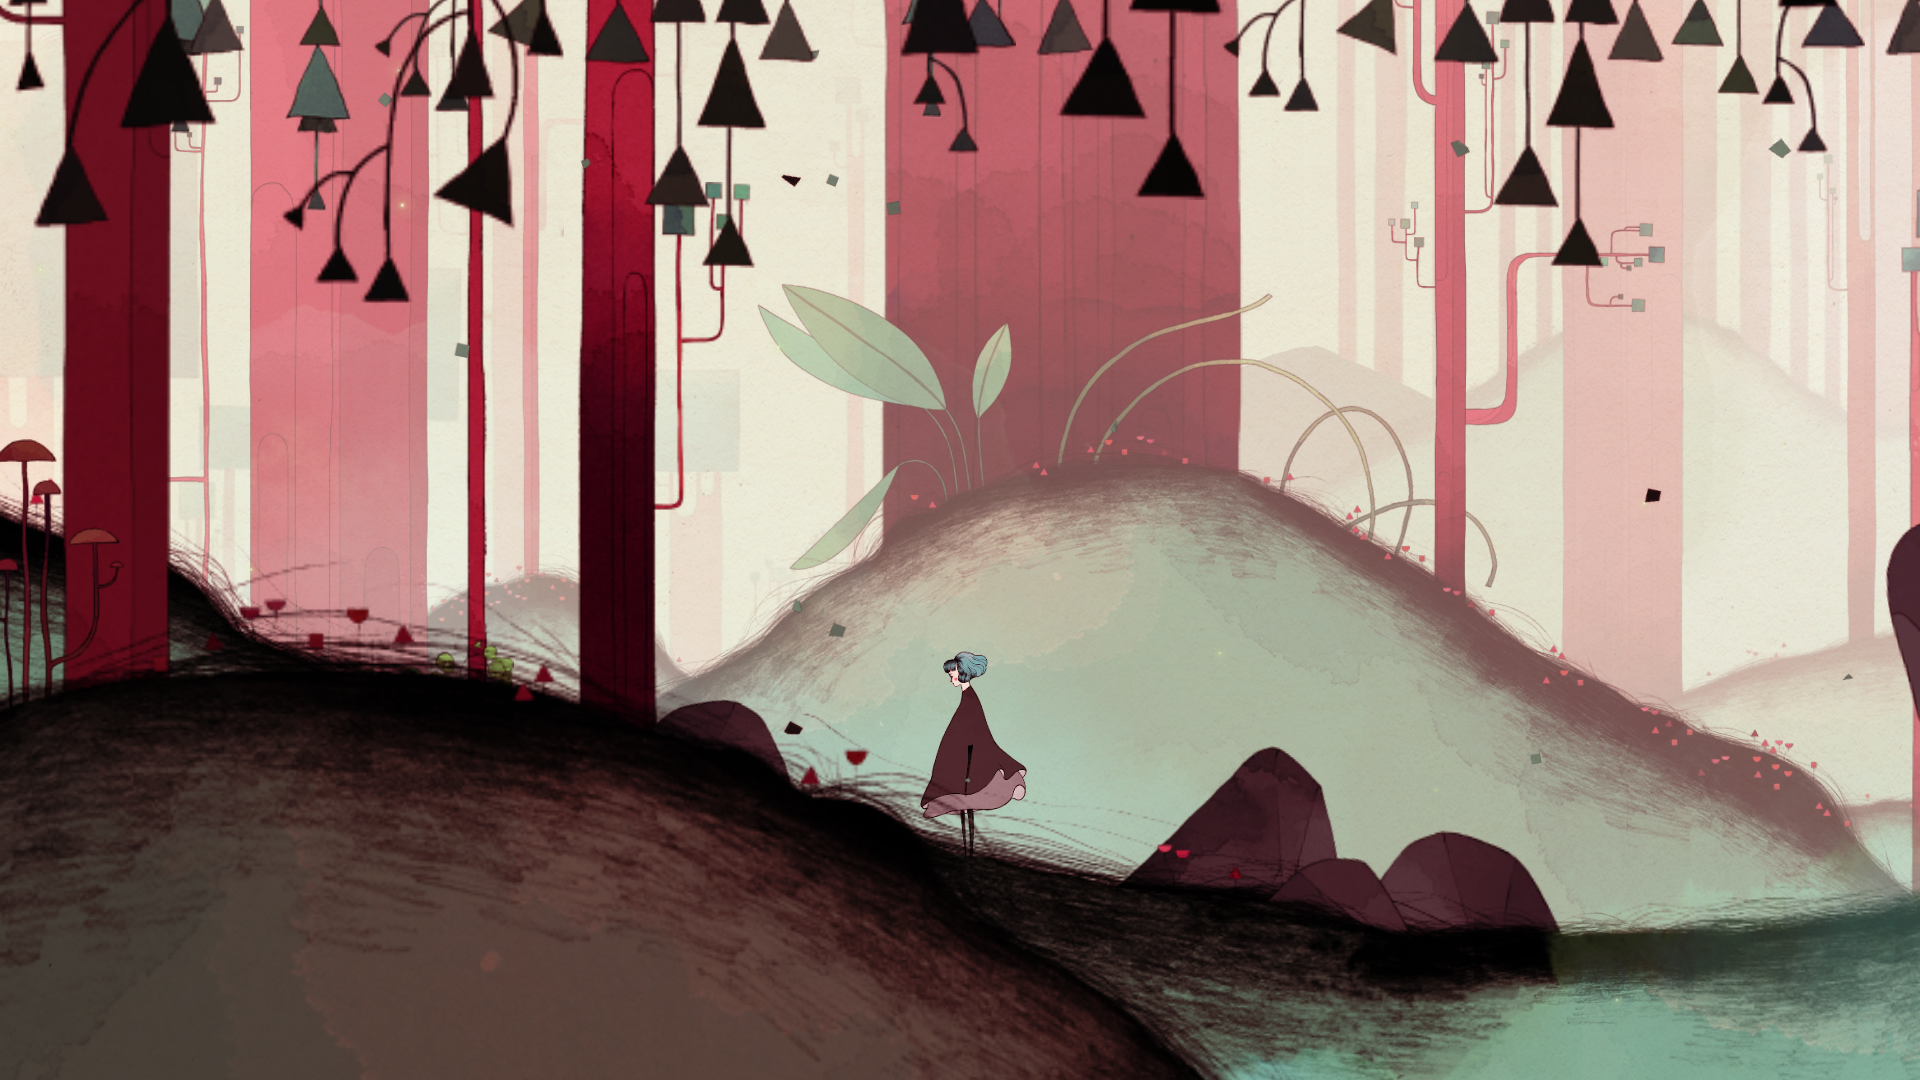 Gris Video Game 1920x1080